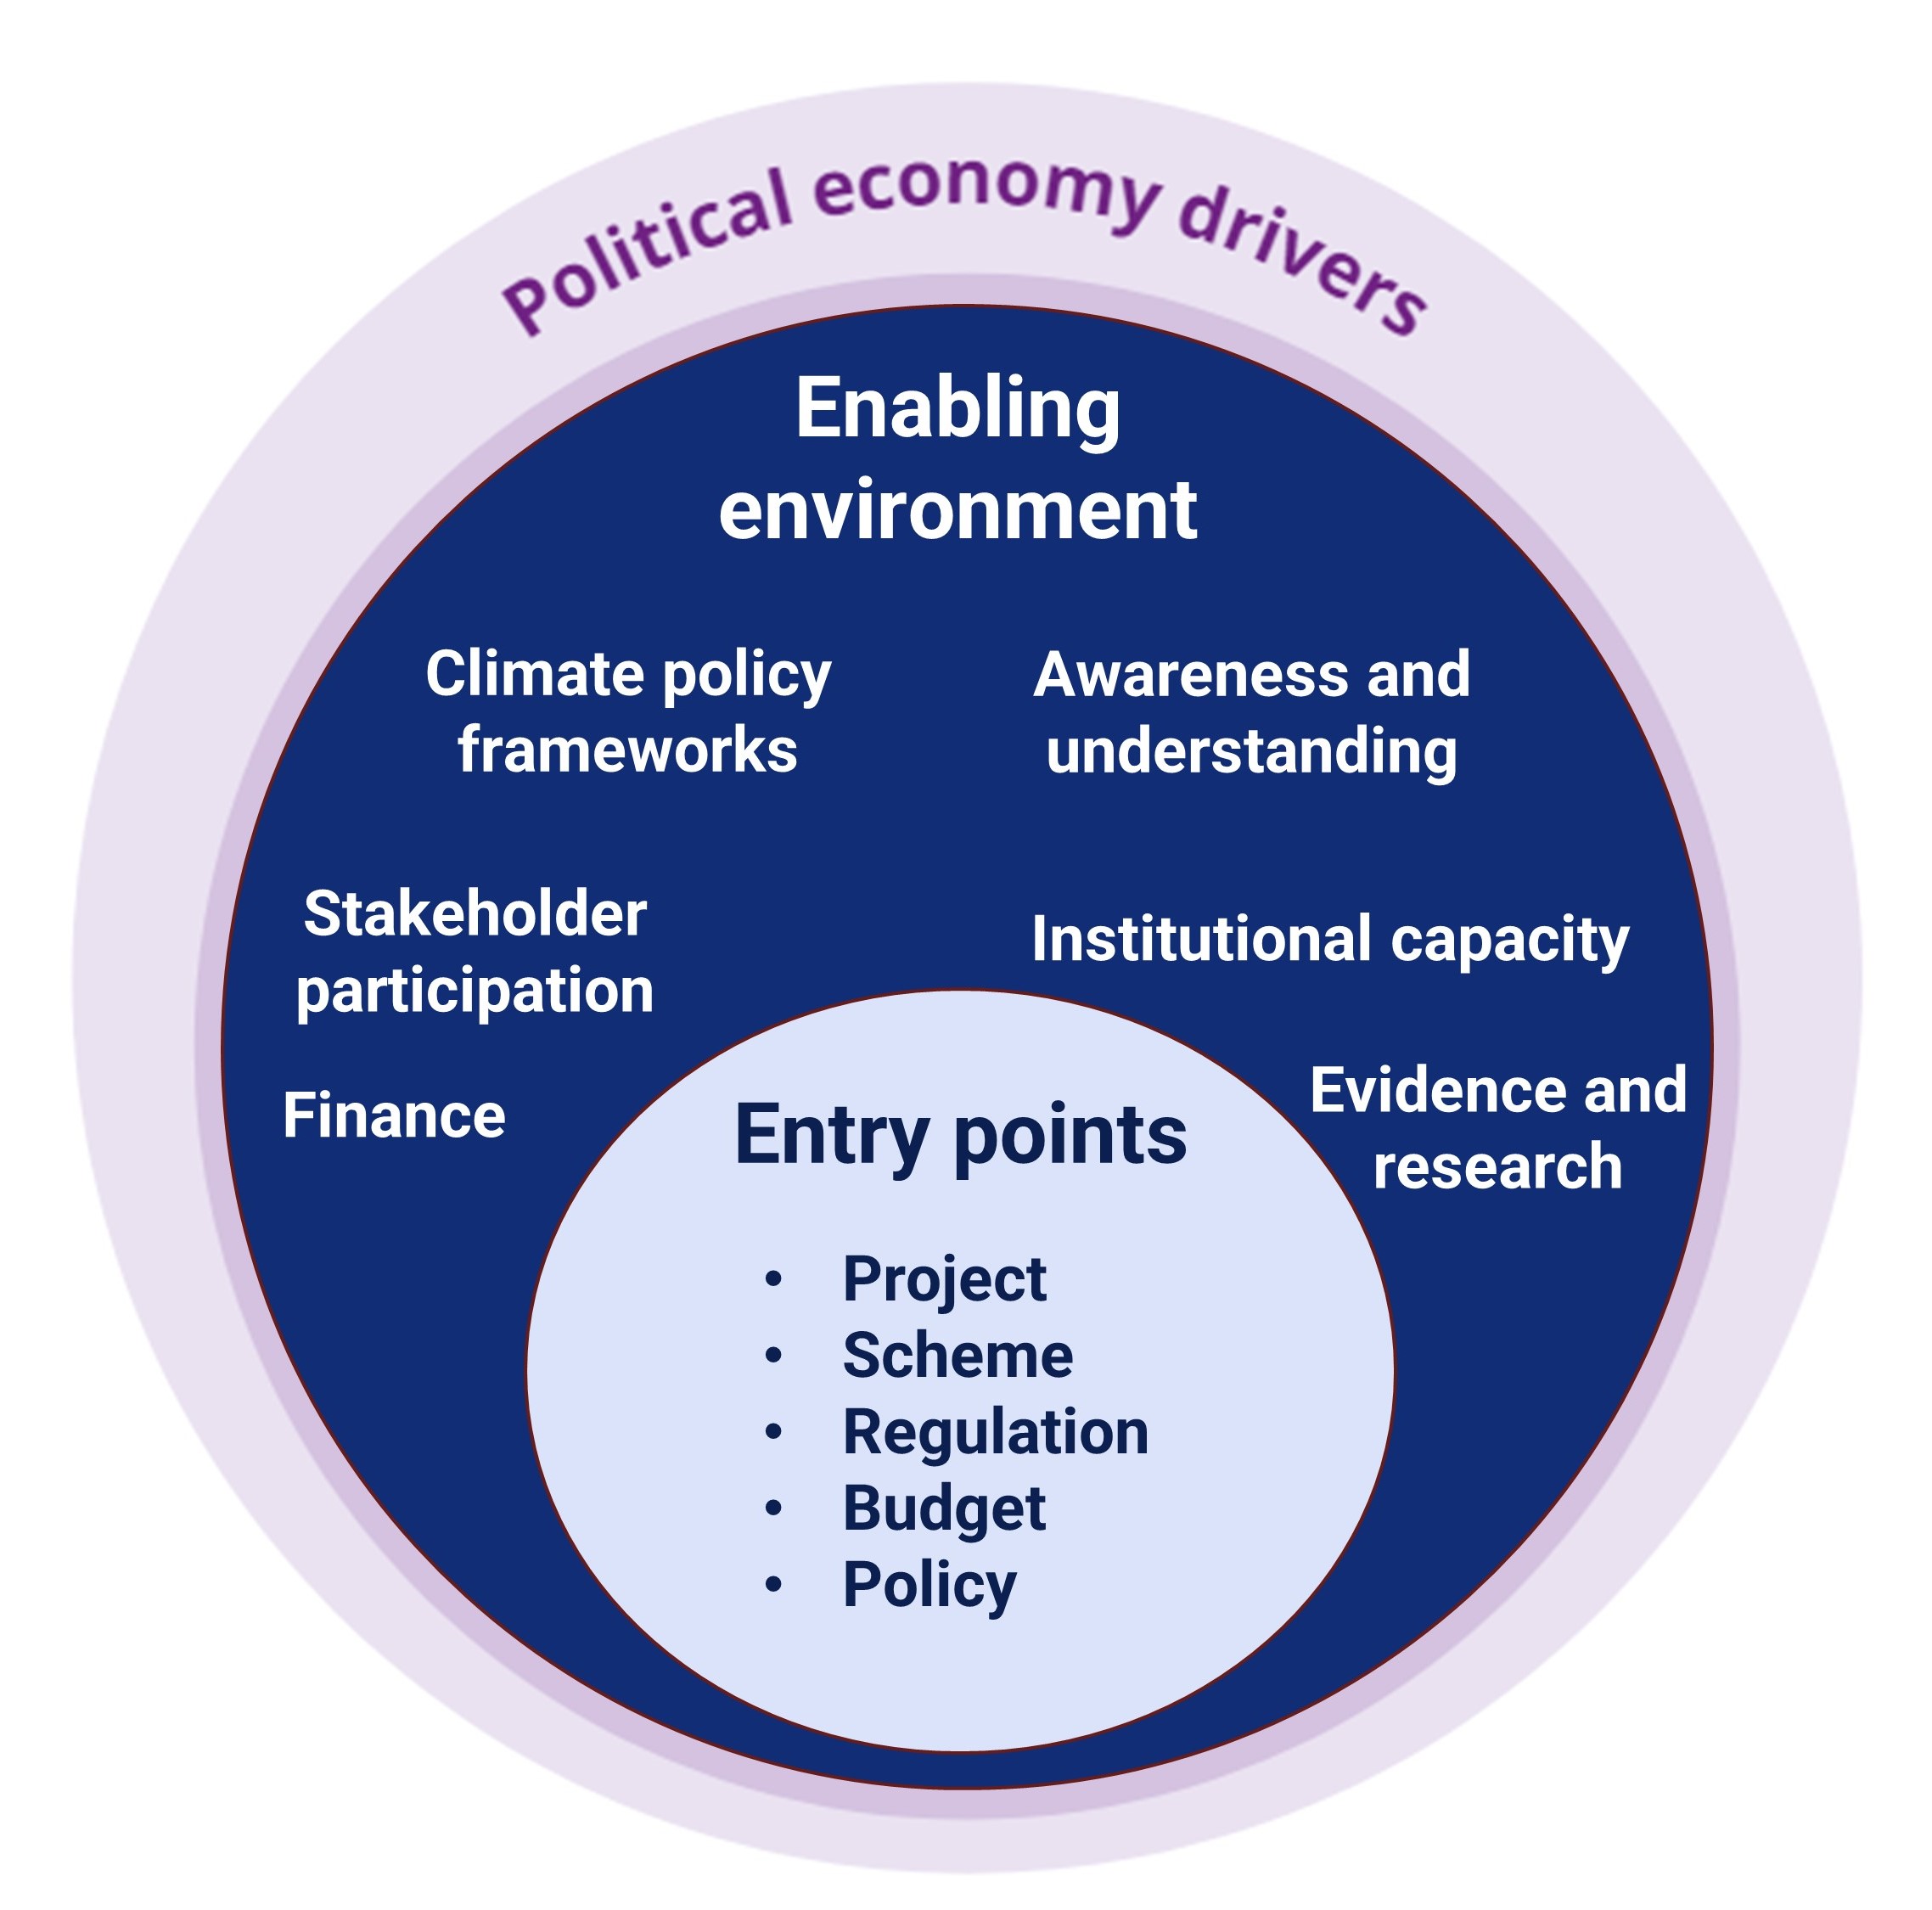 A framework OPM developed for mainstreaming climate across sectors showing political economy drivers, the enabling environment and entry points - there's a link to the text version in the text